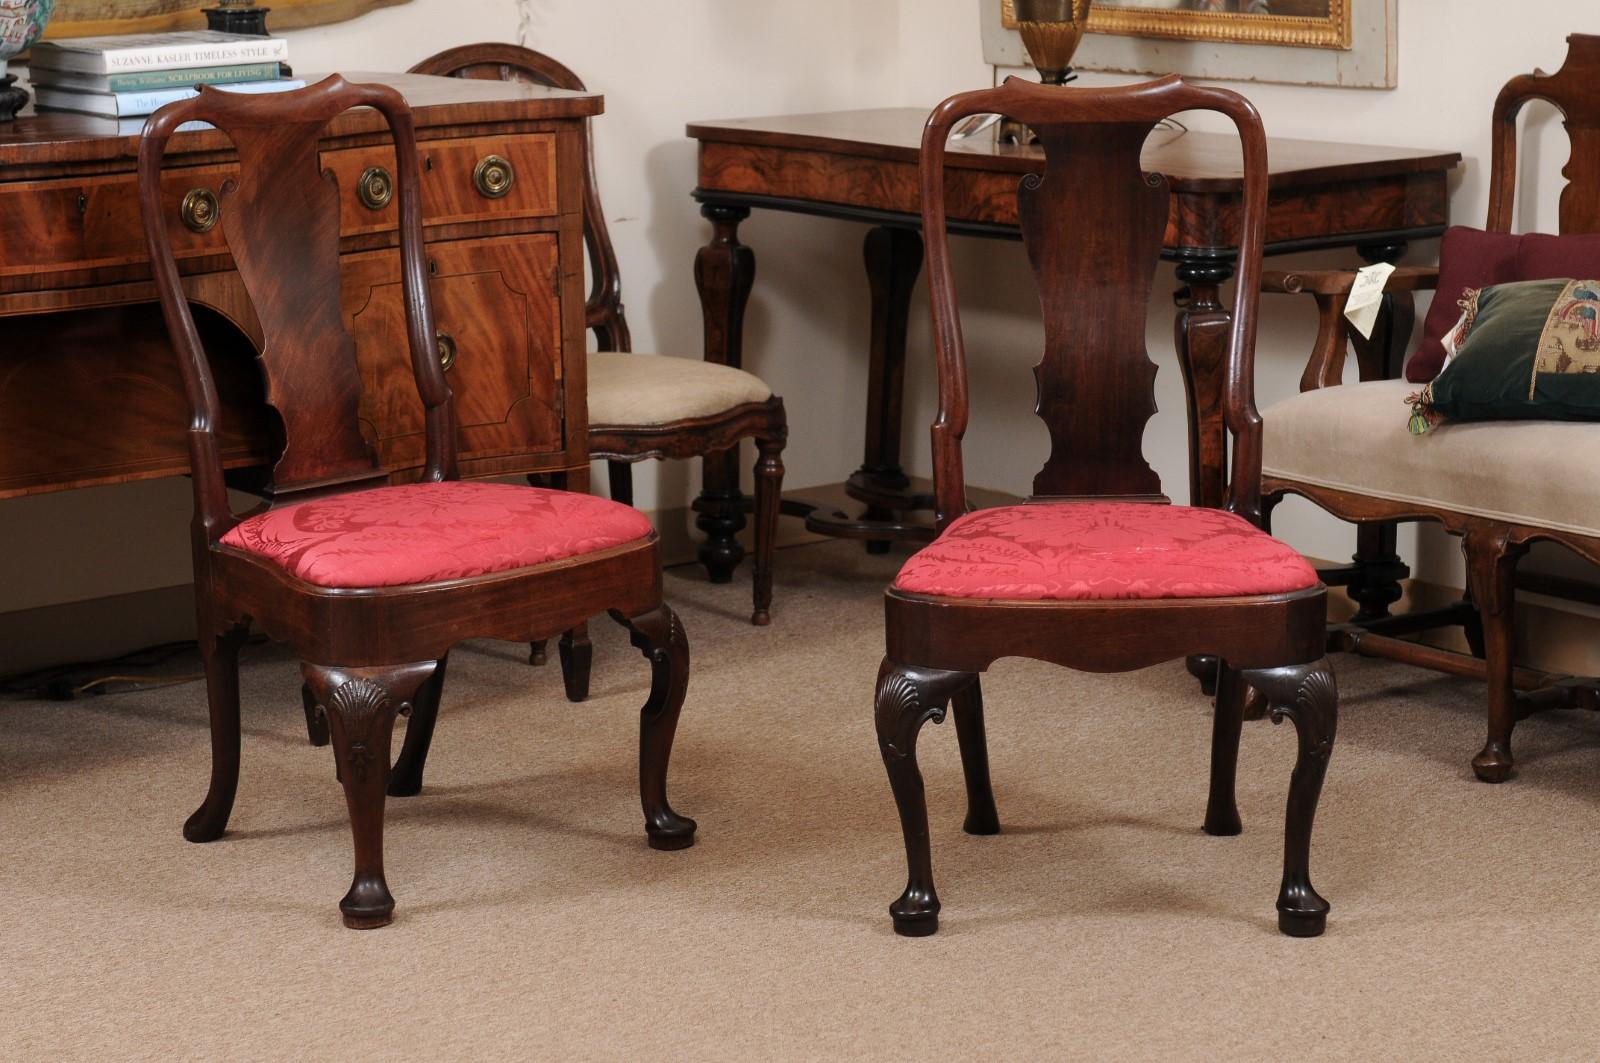 Pair of 18th Century English Queen Anne Period side chairs in walnut with cabriole leg, pad feet, and red Damask Upholstery.